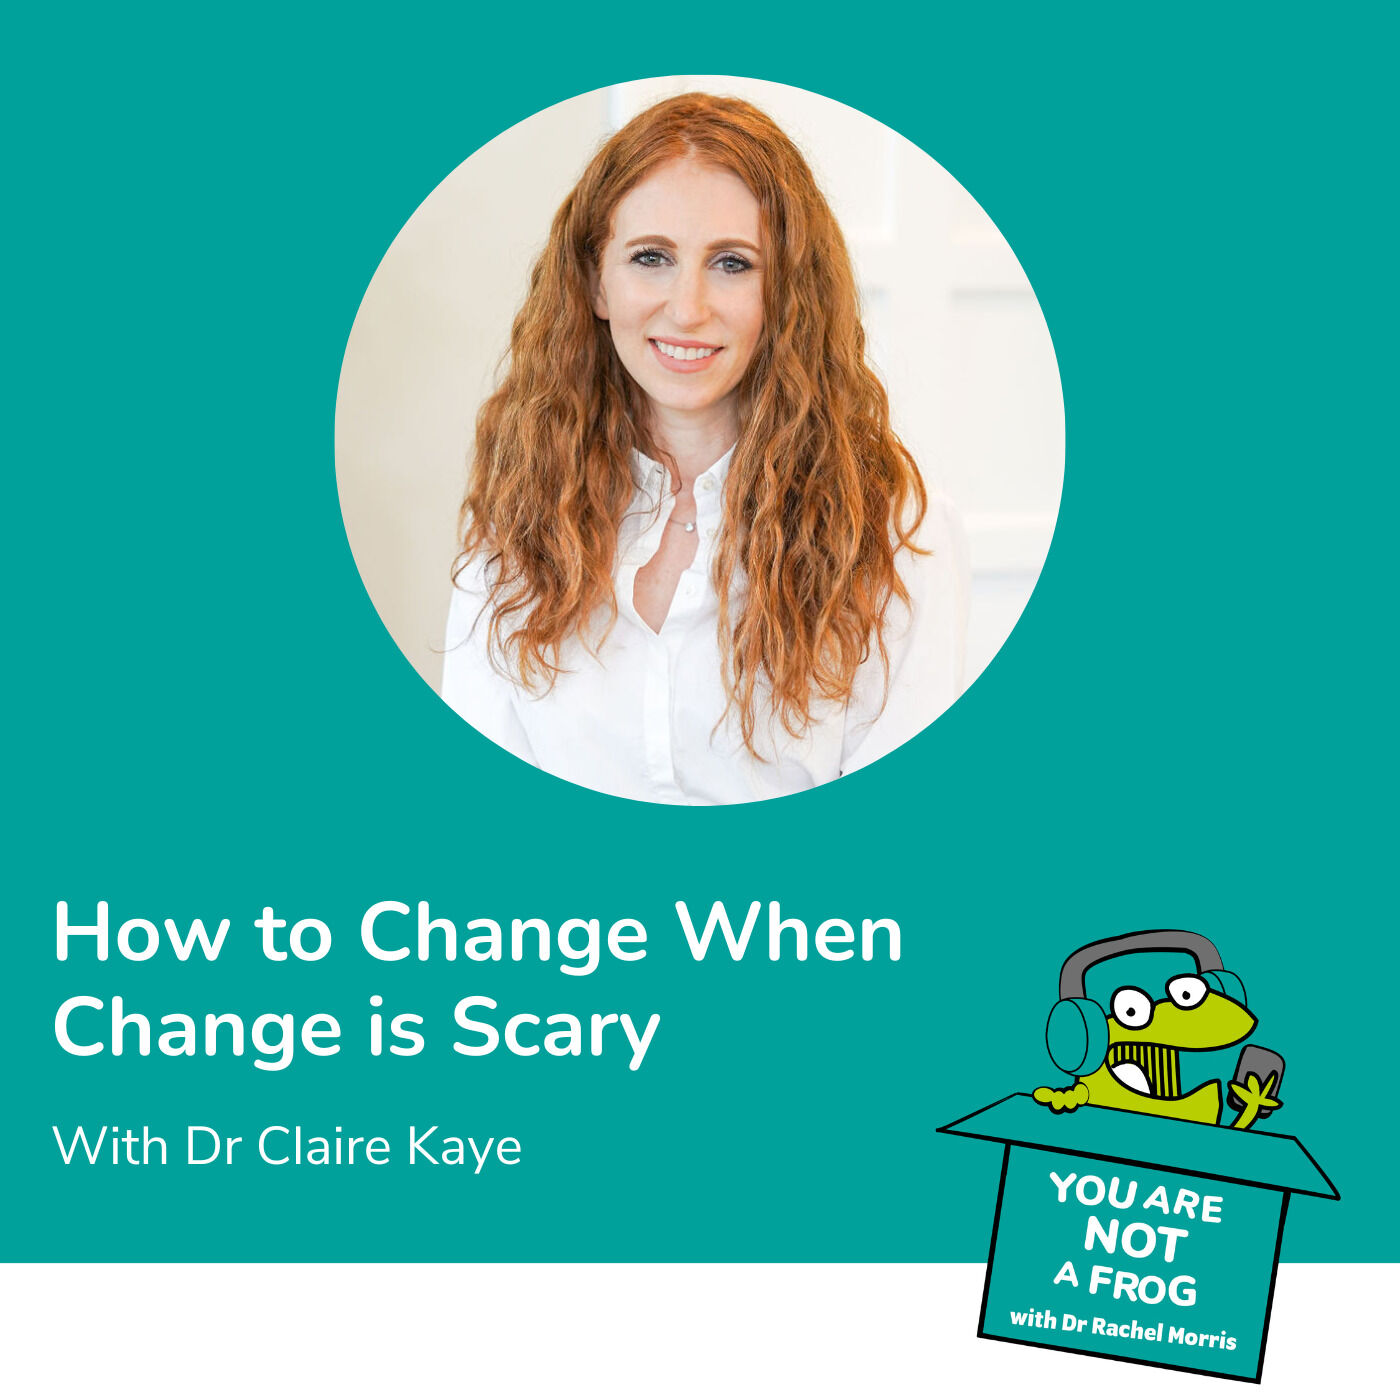 How to Change When Change is Scary